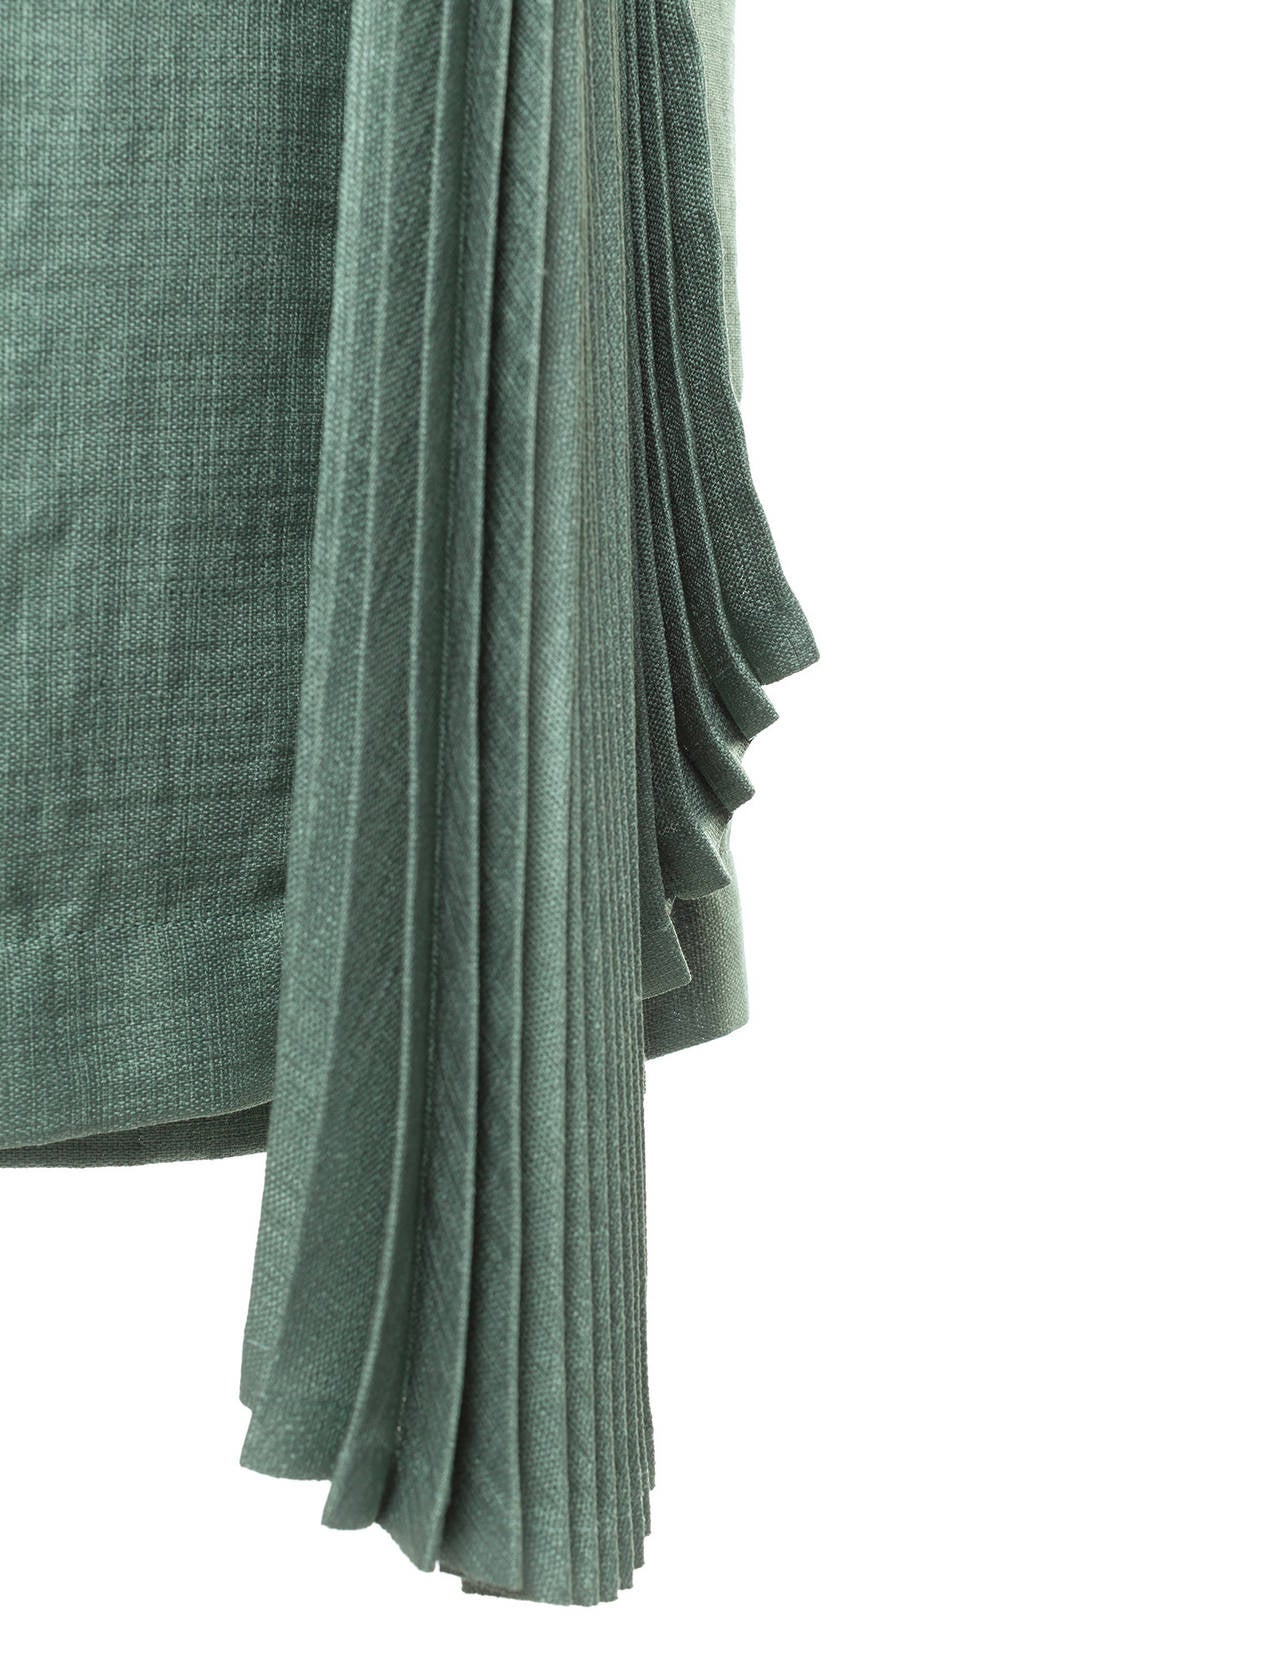 Vintage 90's Issey Miyake Celadon Green Skirt with pleated front detail, Sz. 8 2